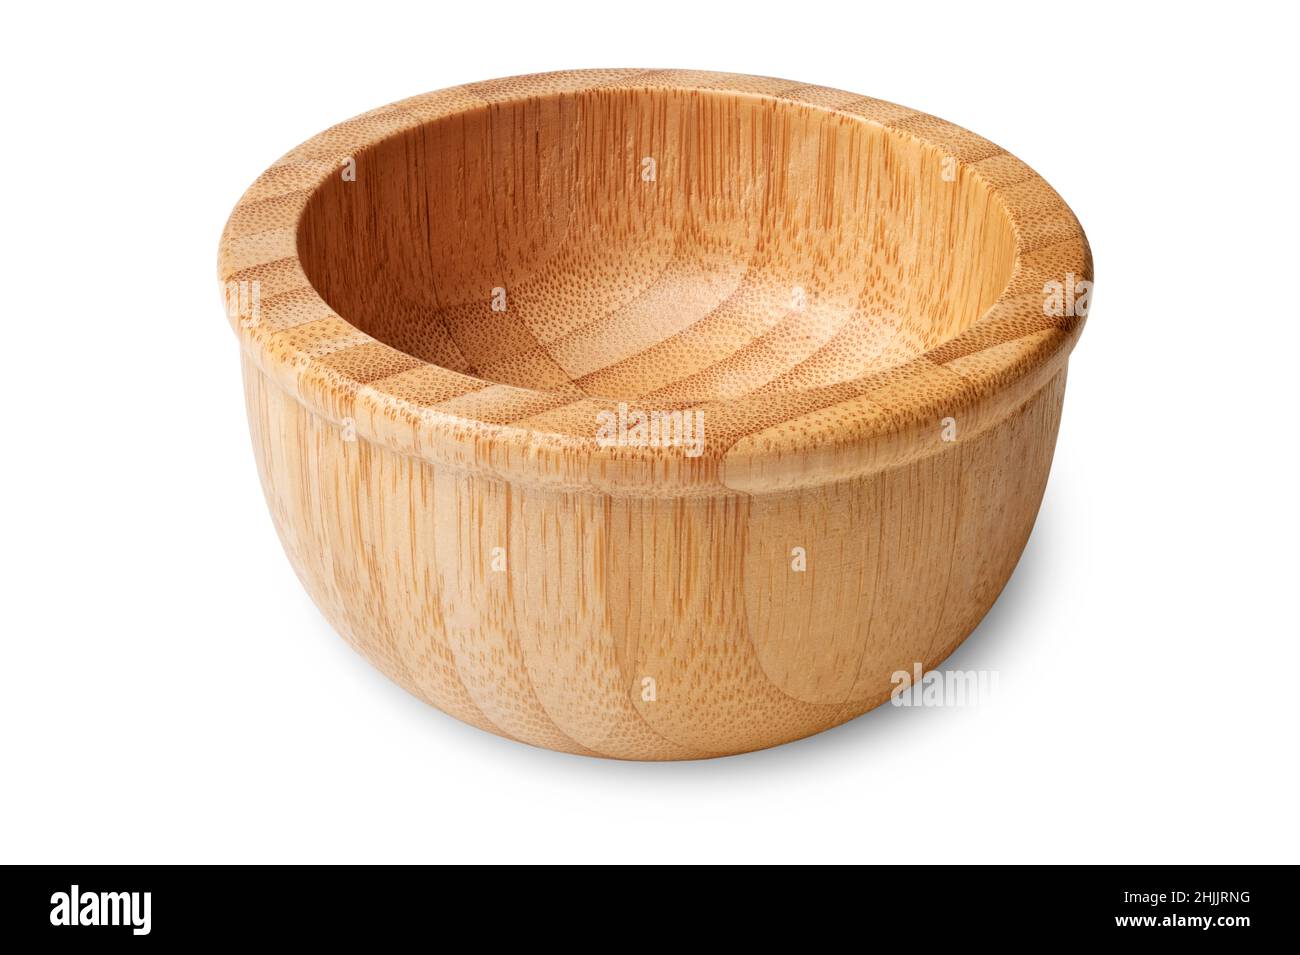 Isolated objects: empty wooden bowl, traditional kitchen utensil, on white background Stock Photo